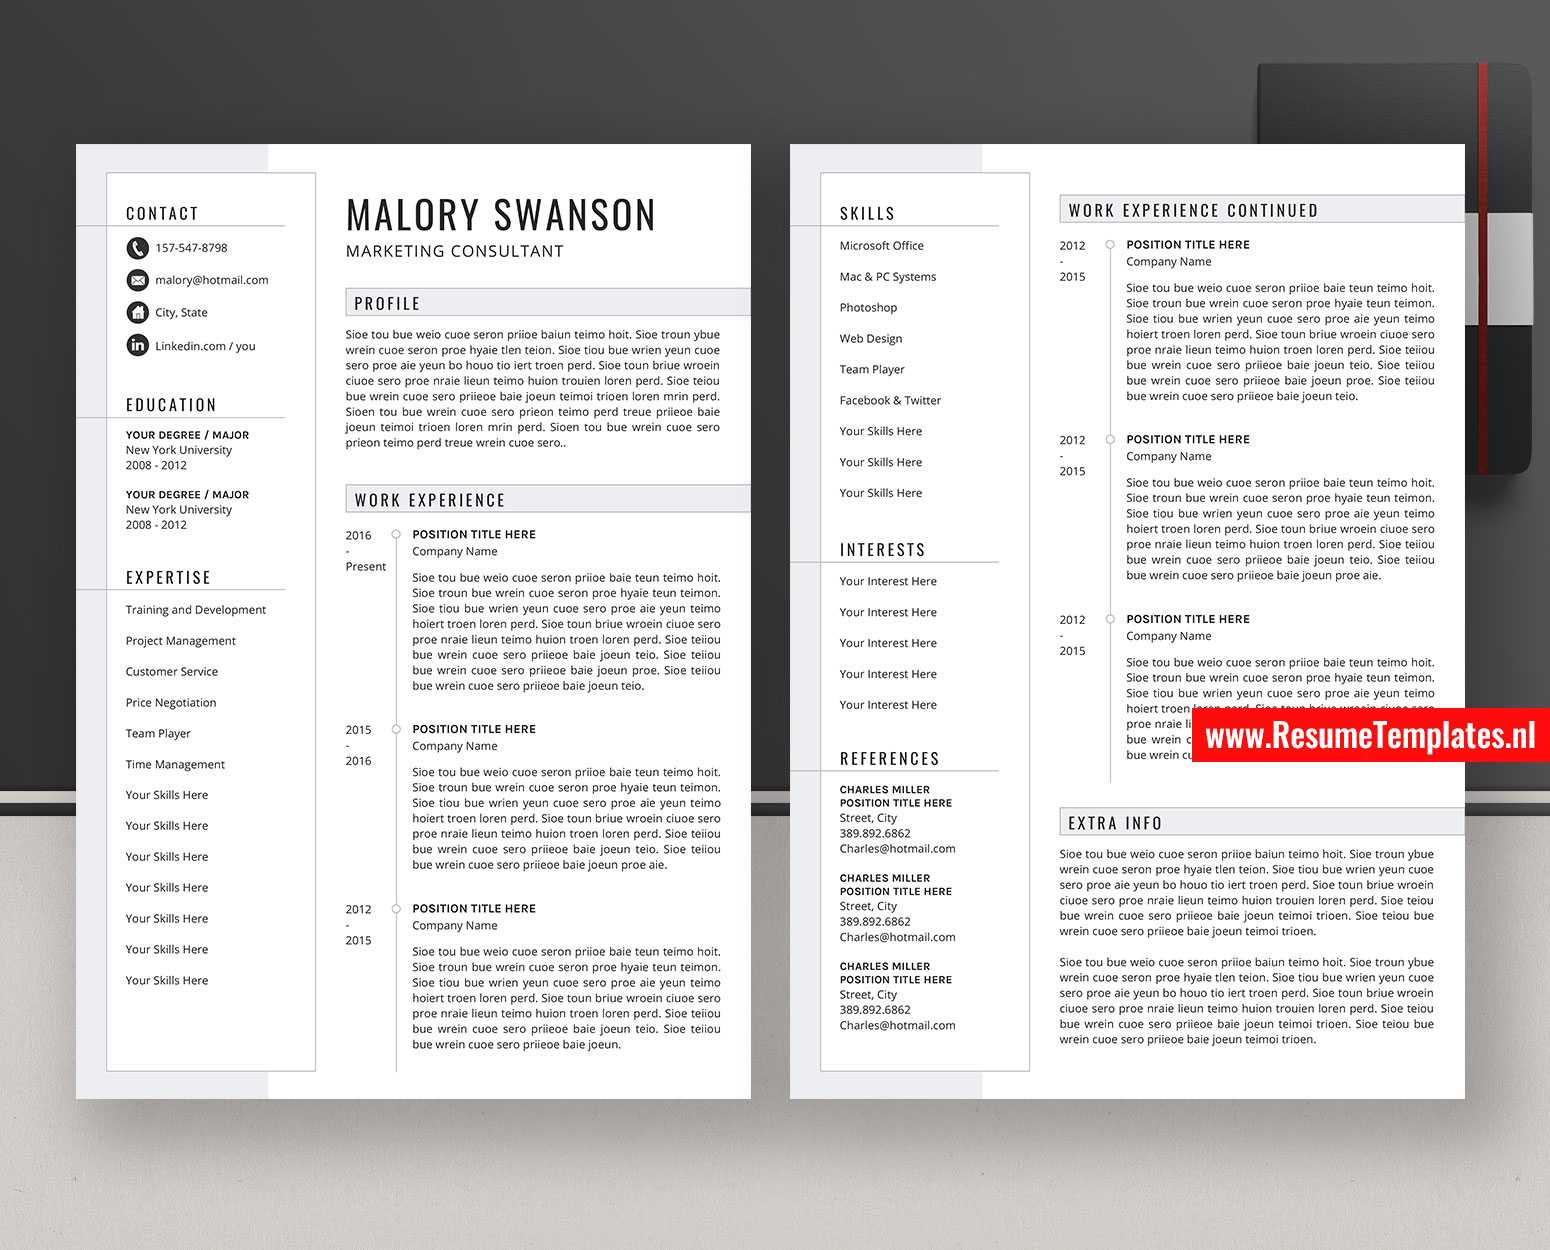 Cv Template / Resume Template For Ms Word, Professional Curriculum Vitae,  Simple Resume, Modern Resume, 1 3 Page Resume, College Student Resume,  First Intended For College Student Resume Template Microsoft Word